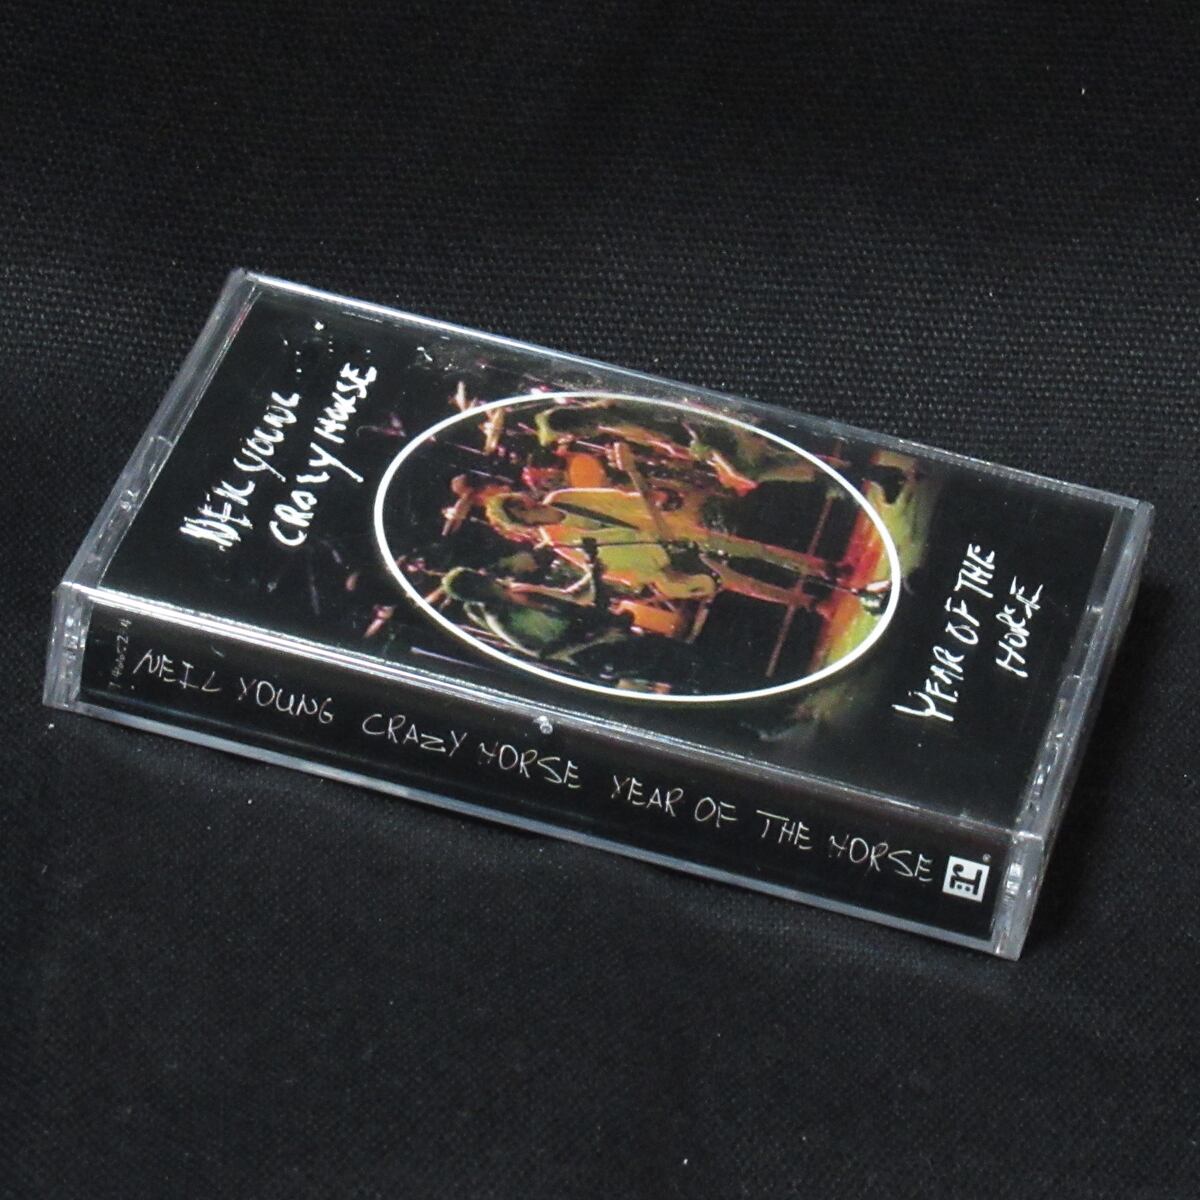 ROCK　YOUNG　HORSE　TAPE】　CRAZY　CASSETTE　YEAR　OF　HORSE【NEW　THE　ECHOES　ニール・ヤング　NEIL